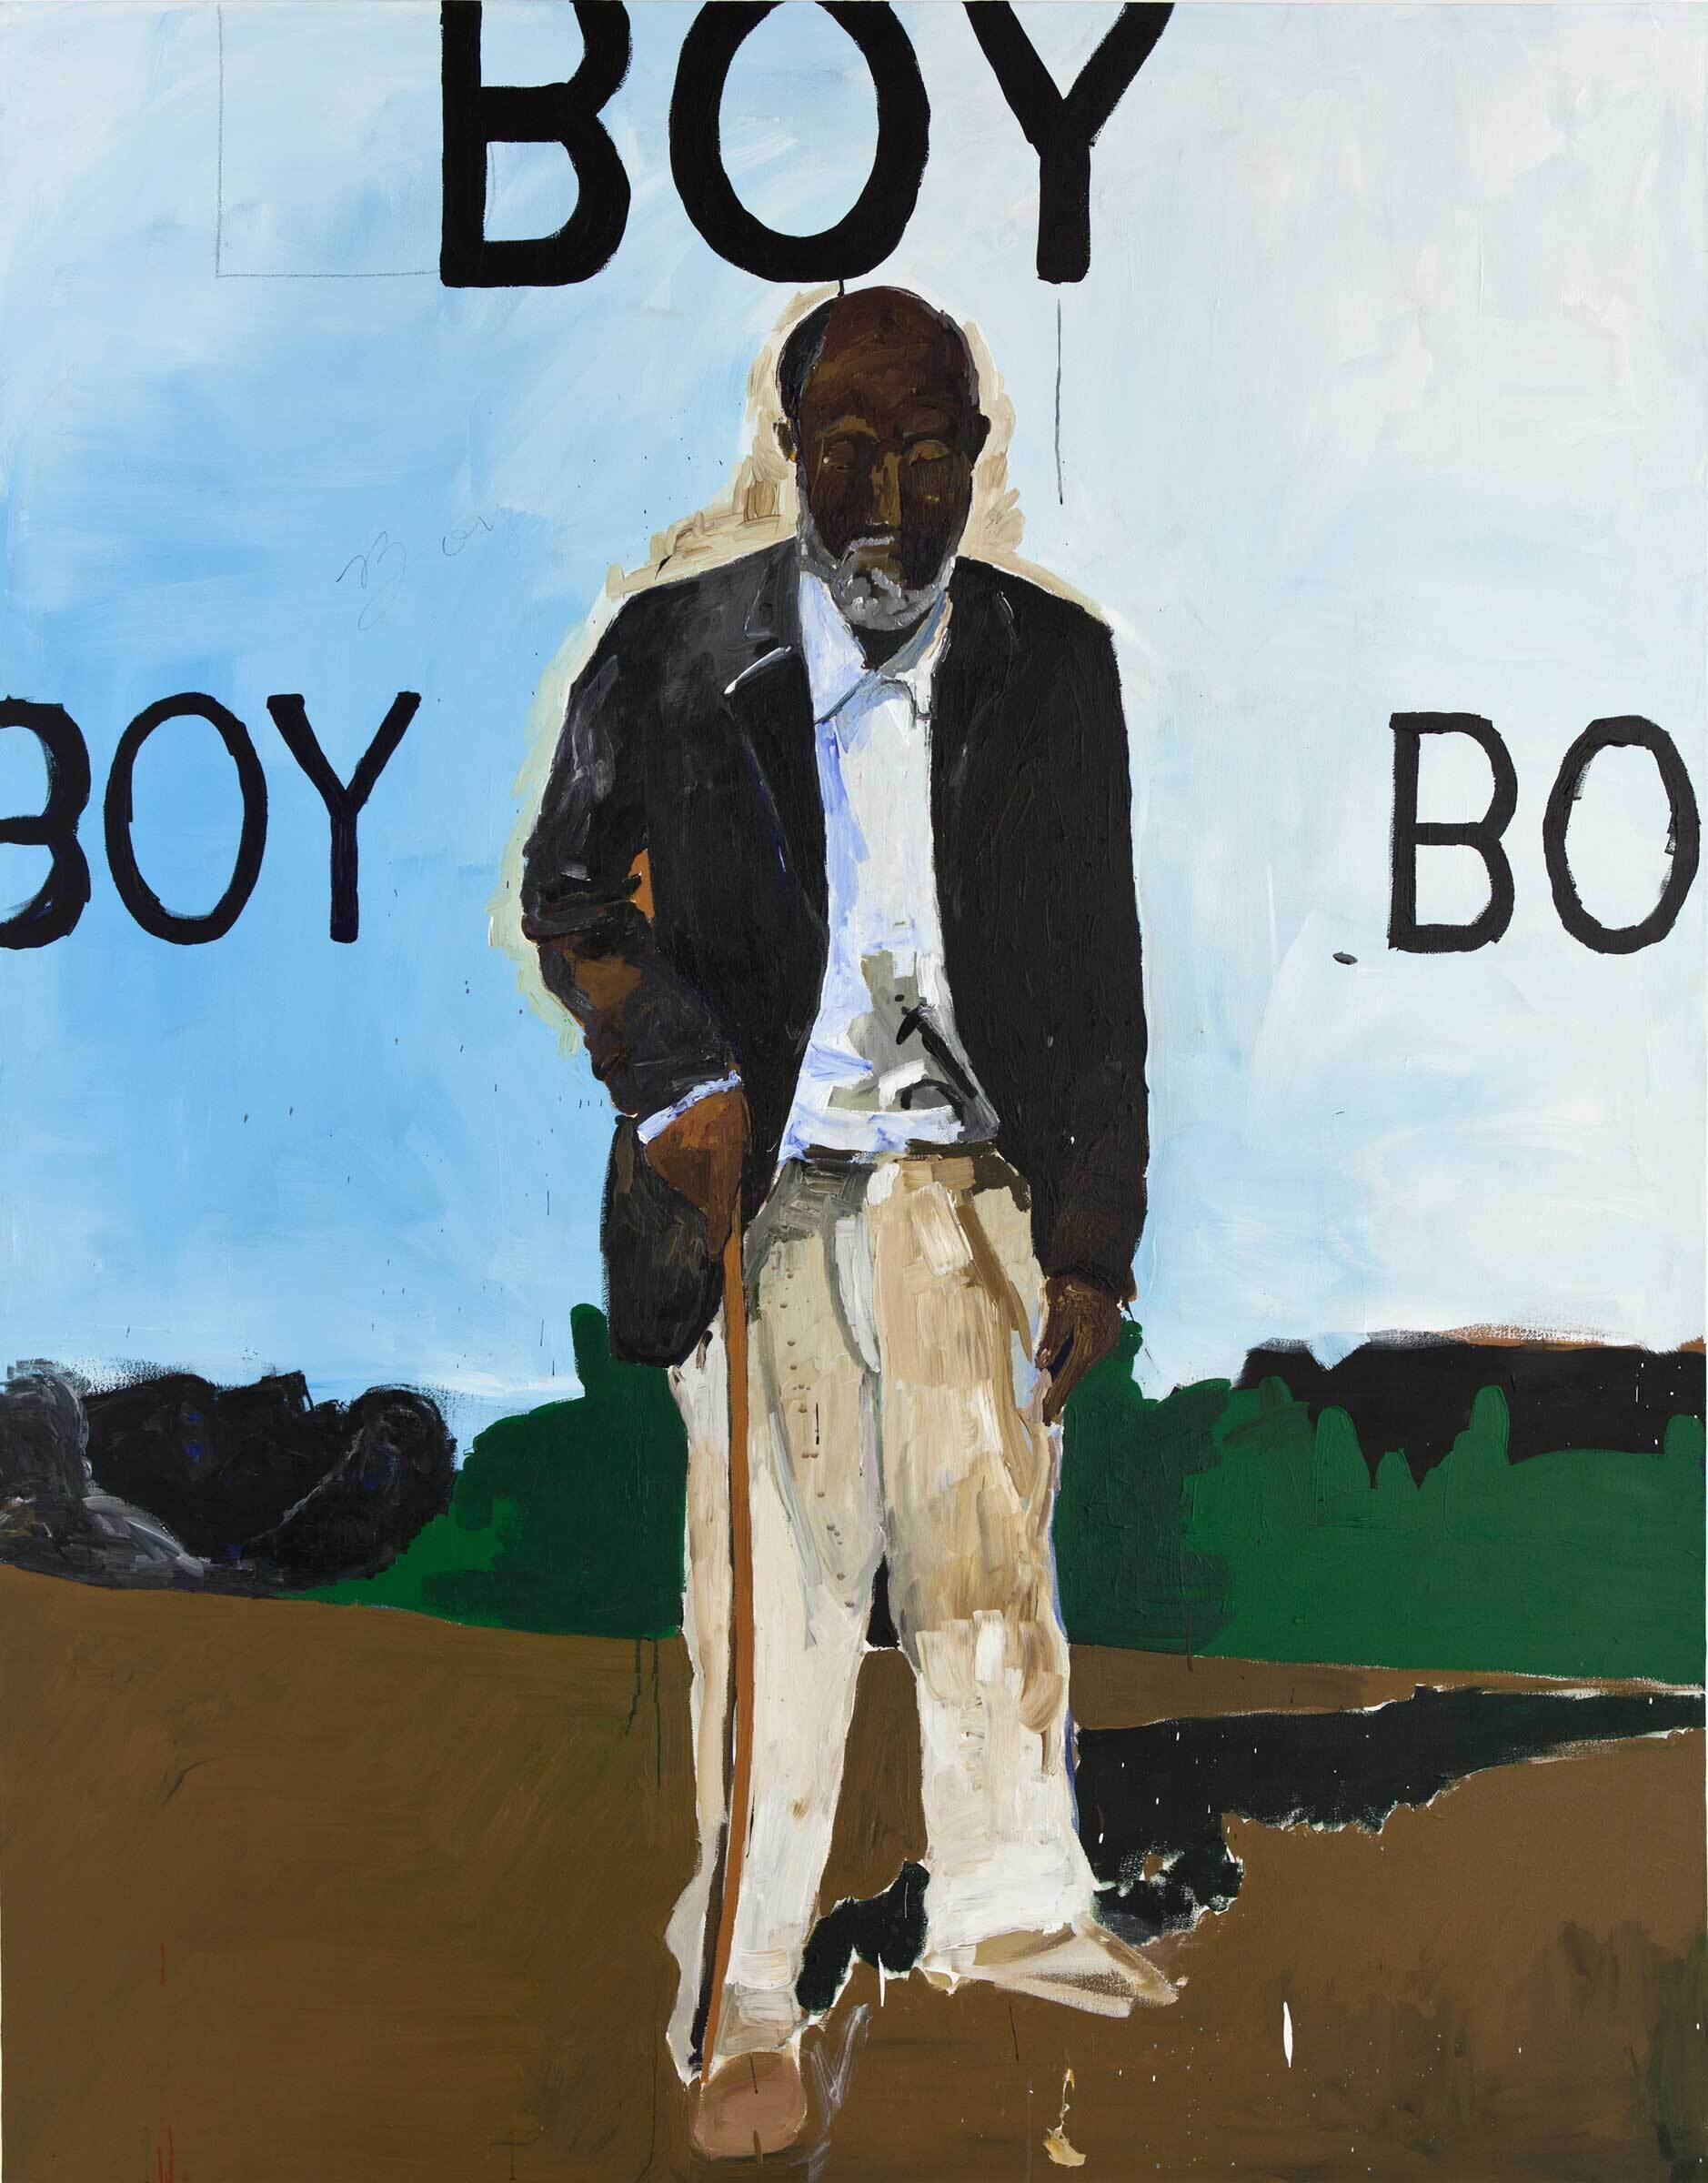 An elderly Black man stands in the midst of a plowed field. The word "BOY" is written three times in large black letters against the blue sky.